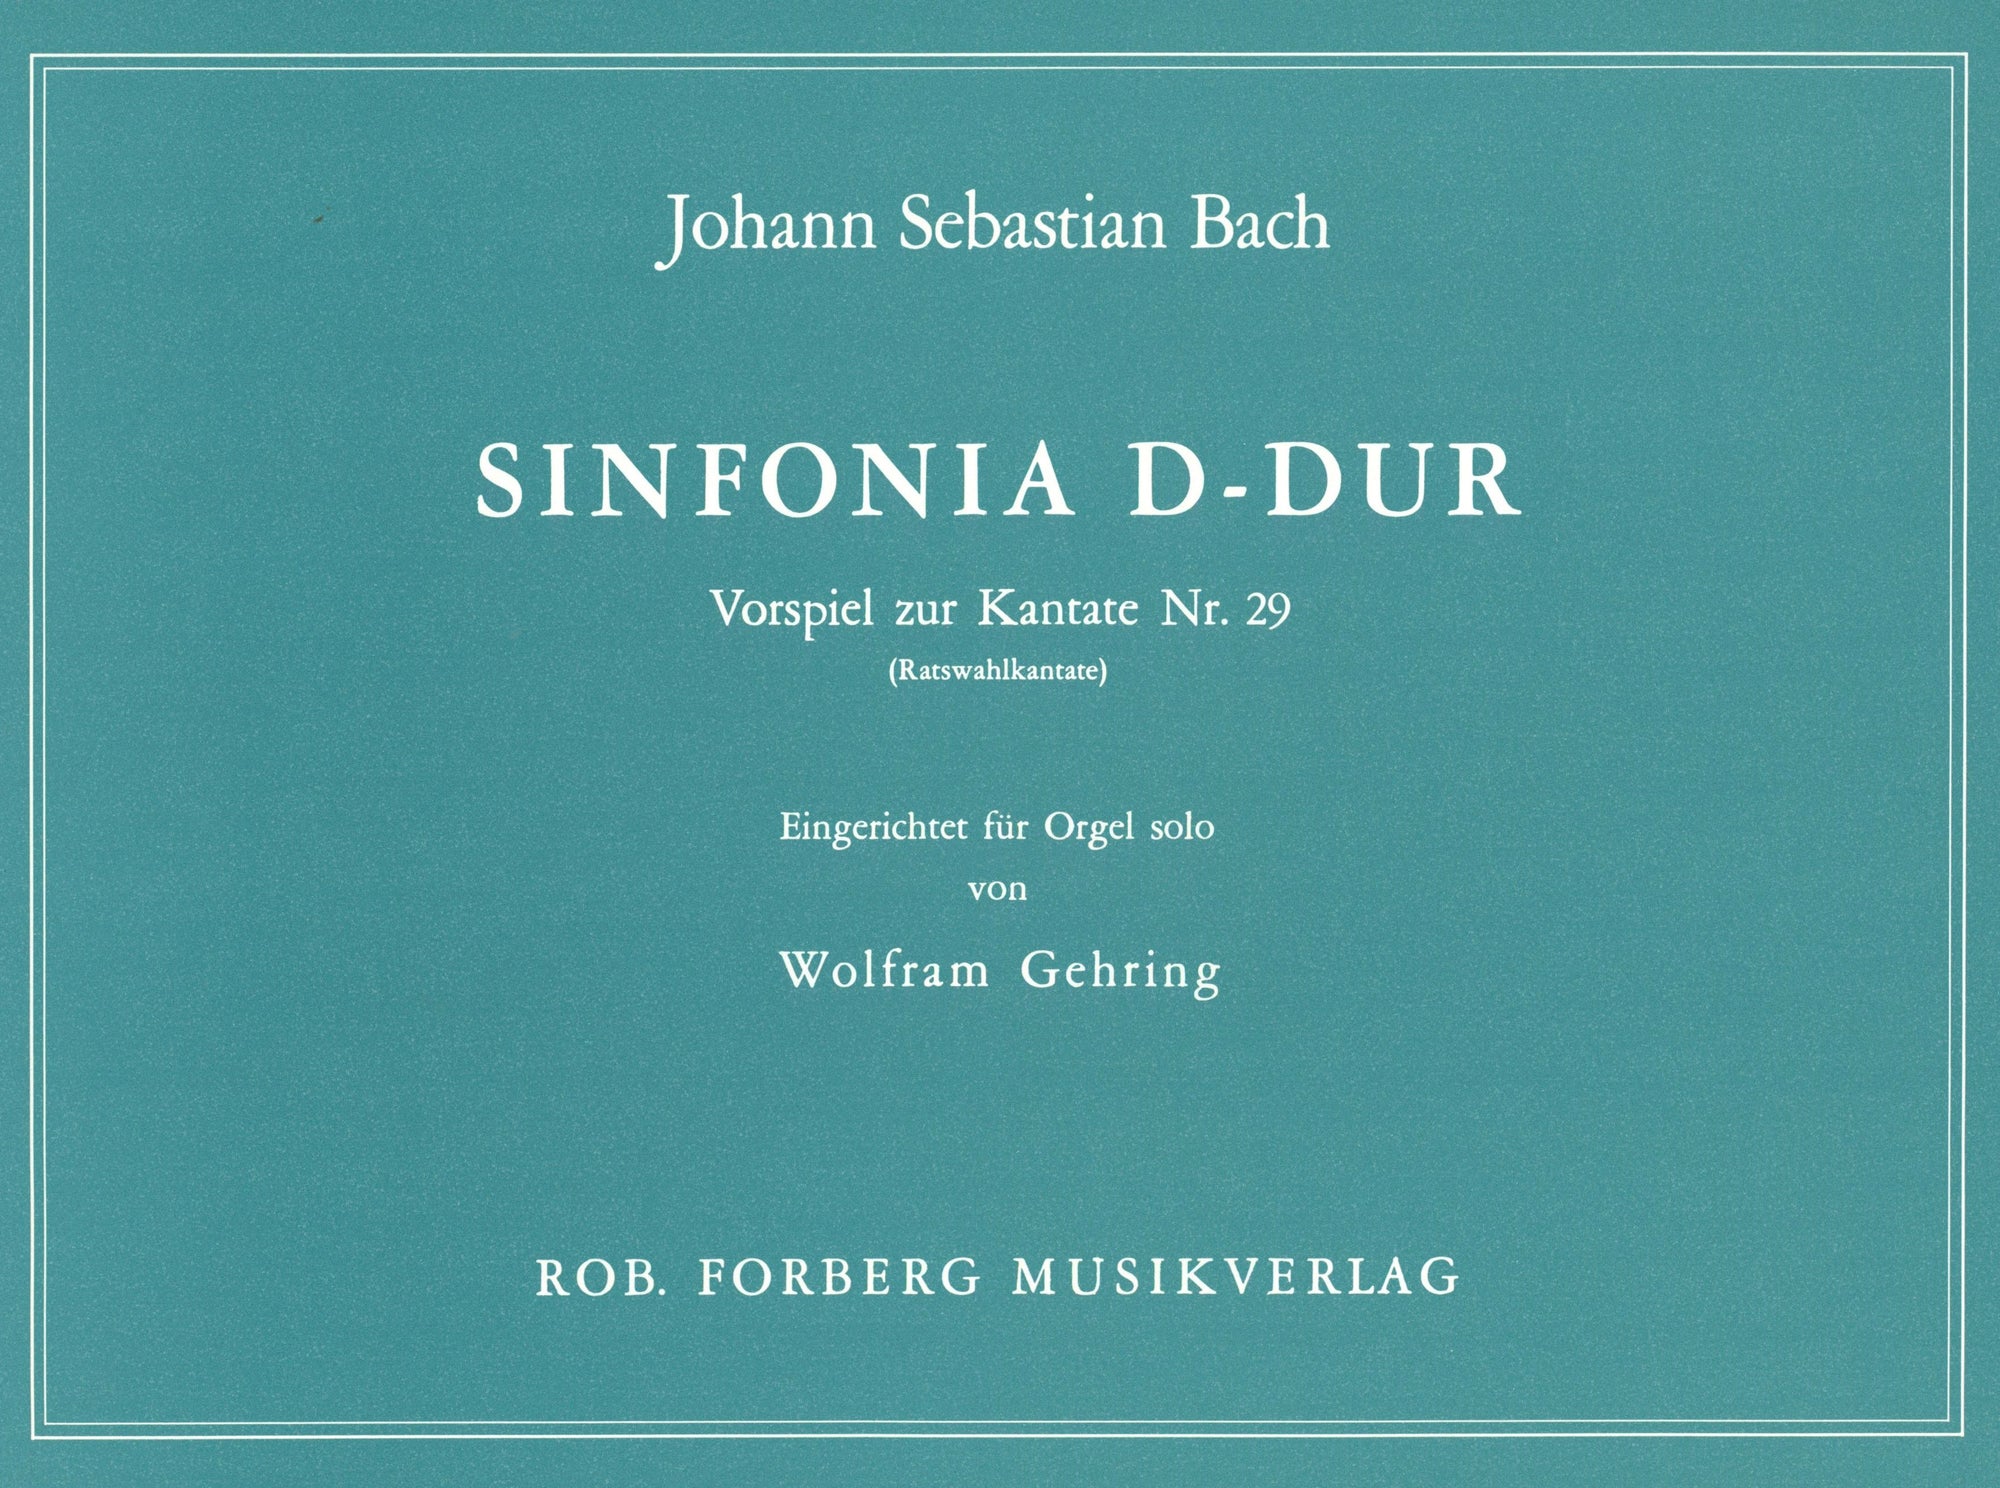 Bach: Sinfonia in D Major from Cantata No. 29 (arr. for organ)